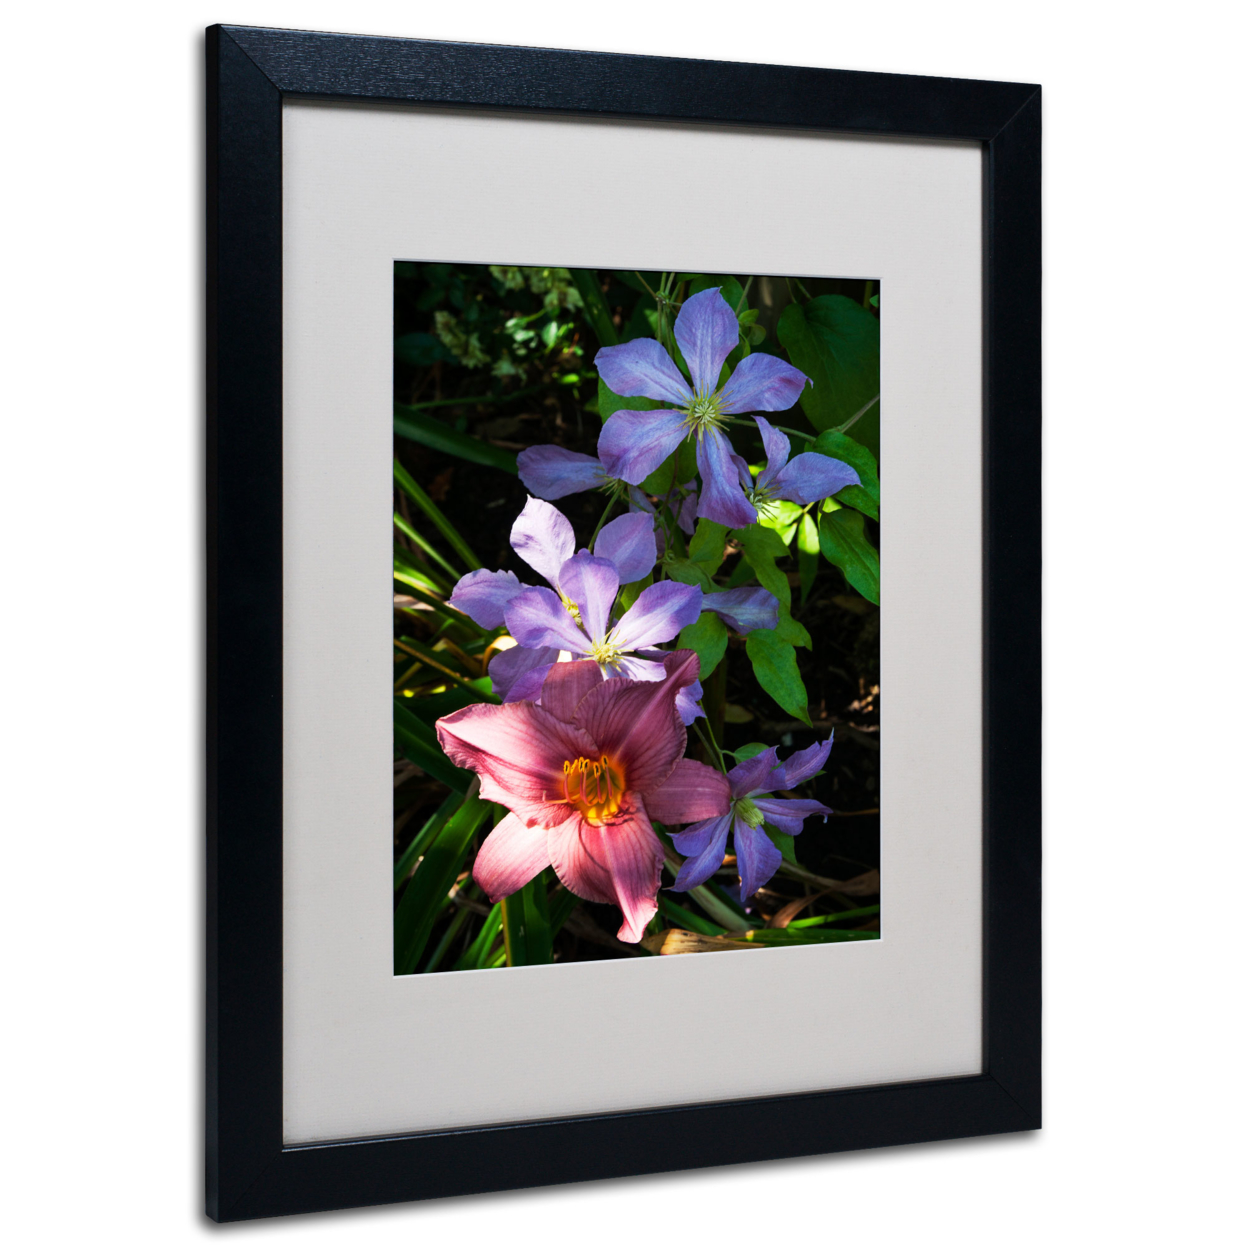 Kurt Shaffer 'Clematis And Lily' Black Wooden Framed Art 18 X 22 Inches